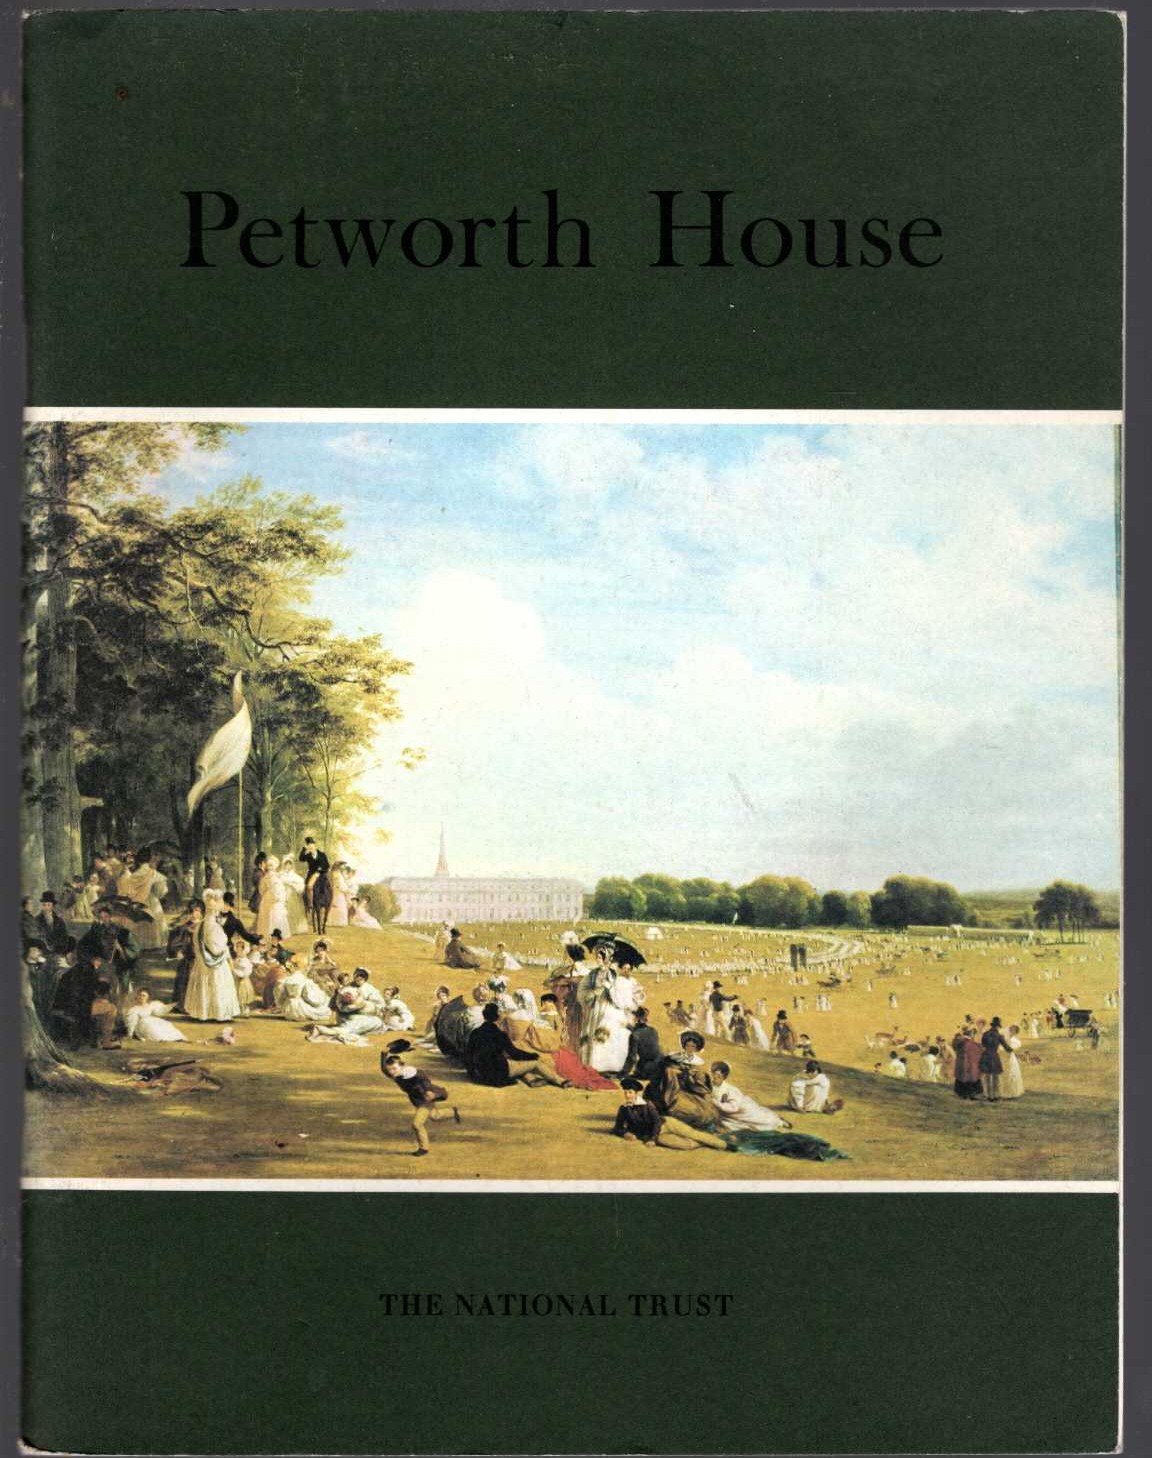 \ PETWORTH HOUSE by The National Trust front book cover image